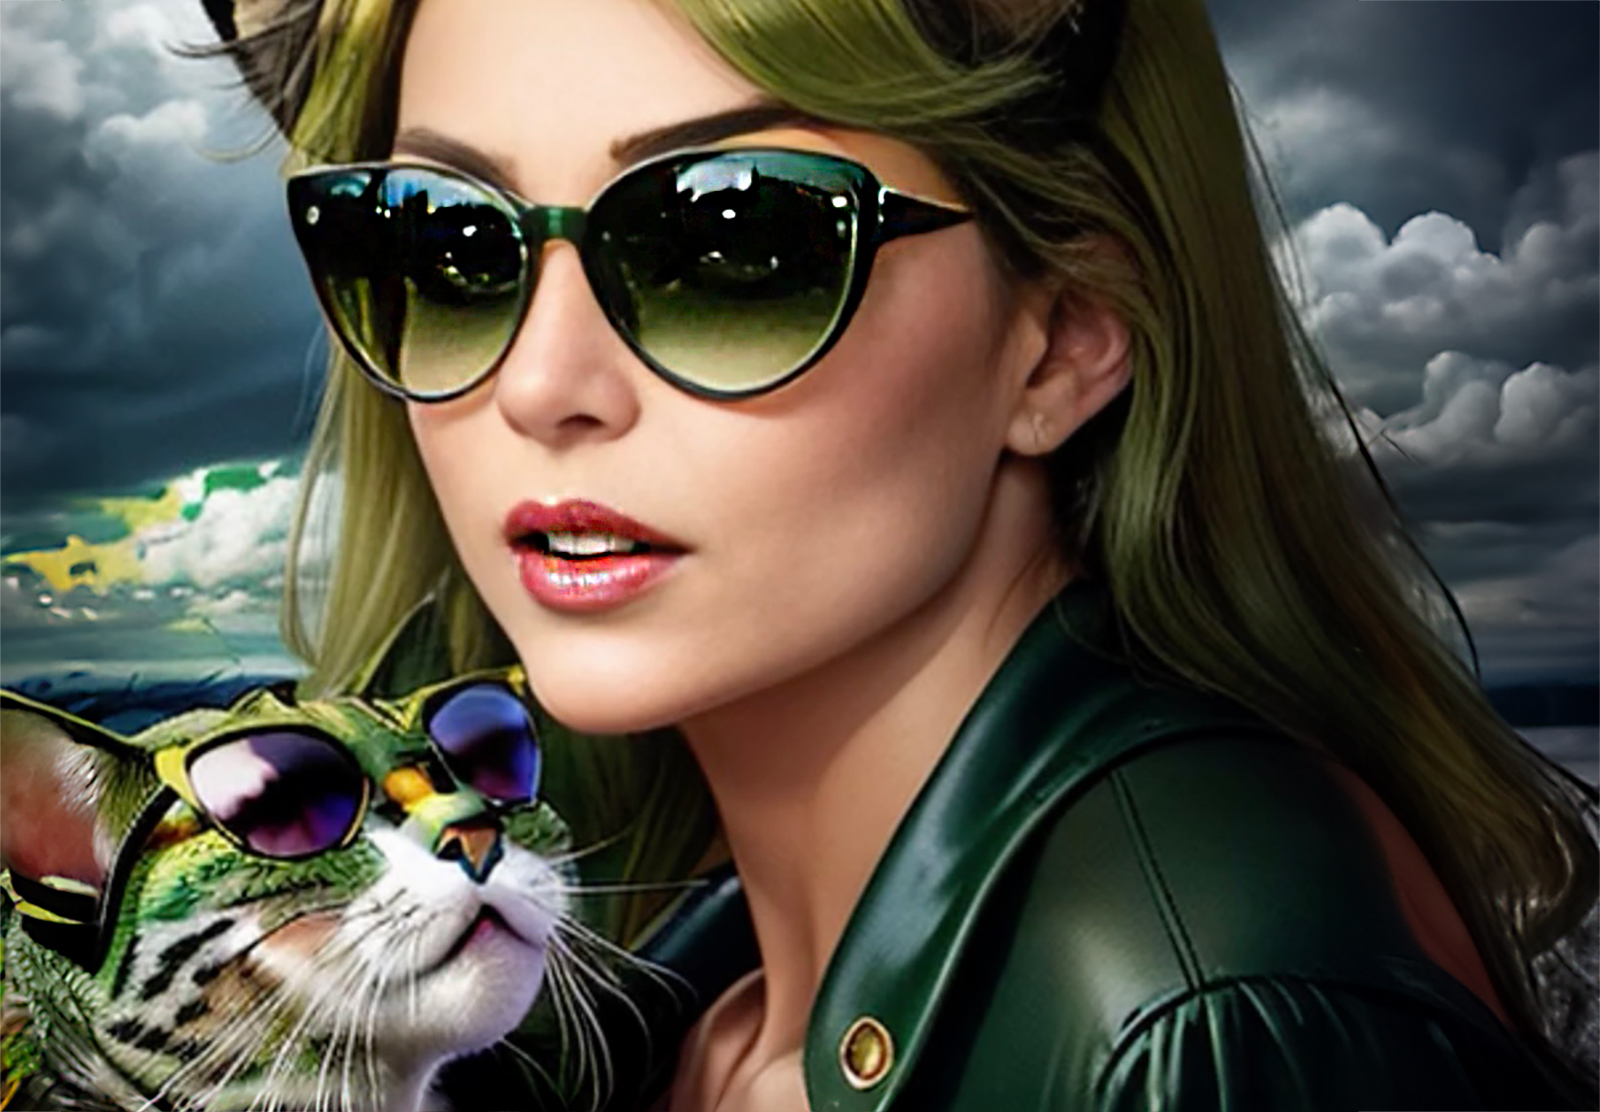 Illustration-of-girl-with-cat-and-sunglasses